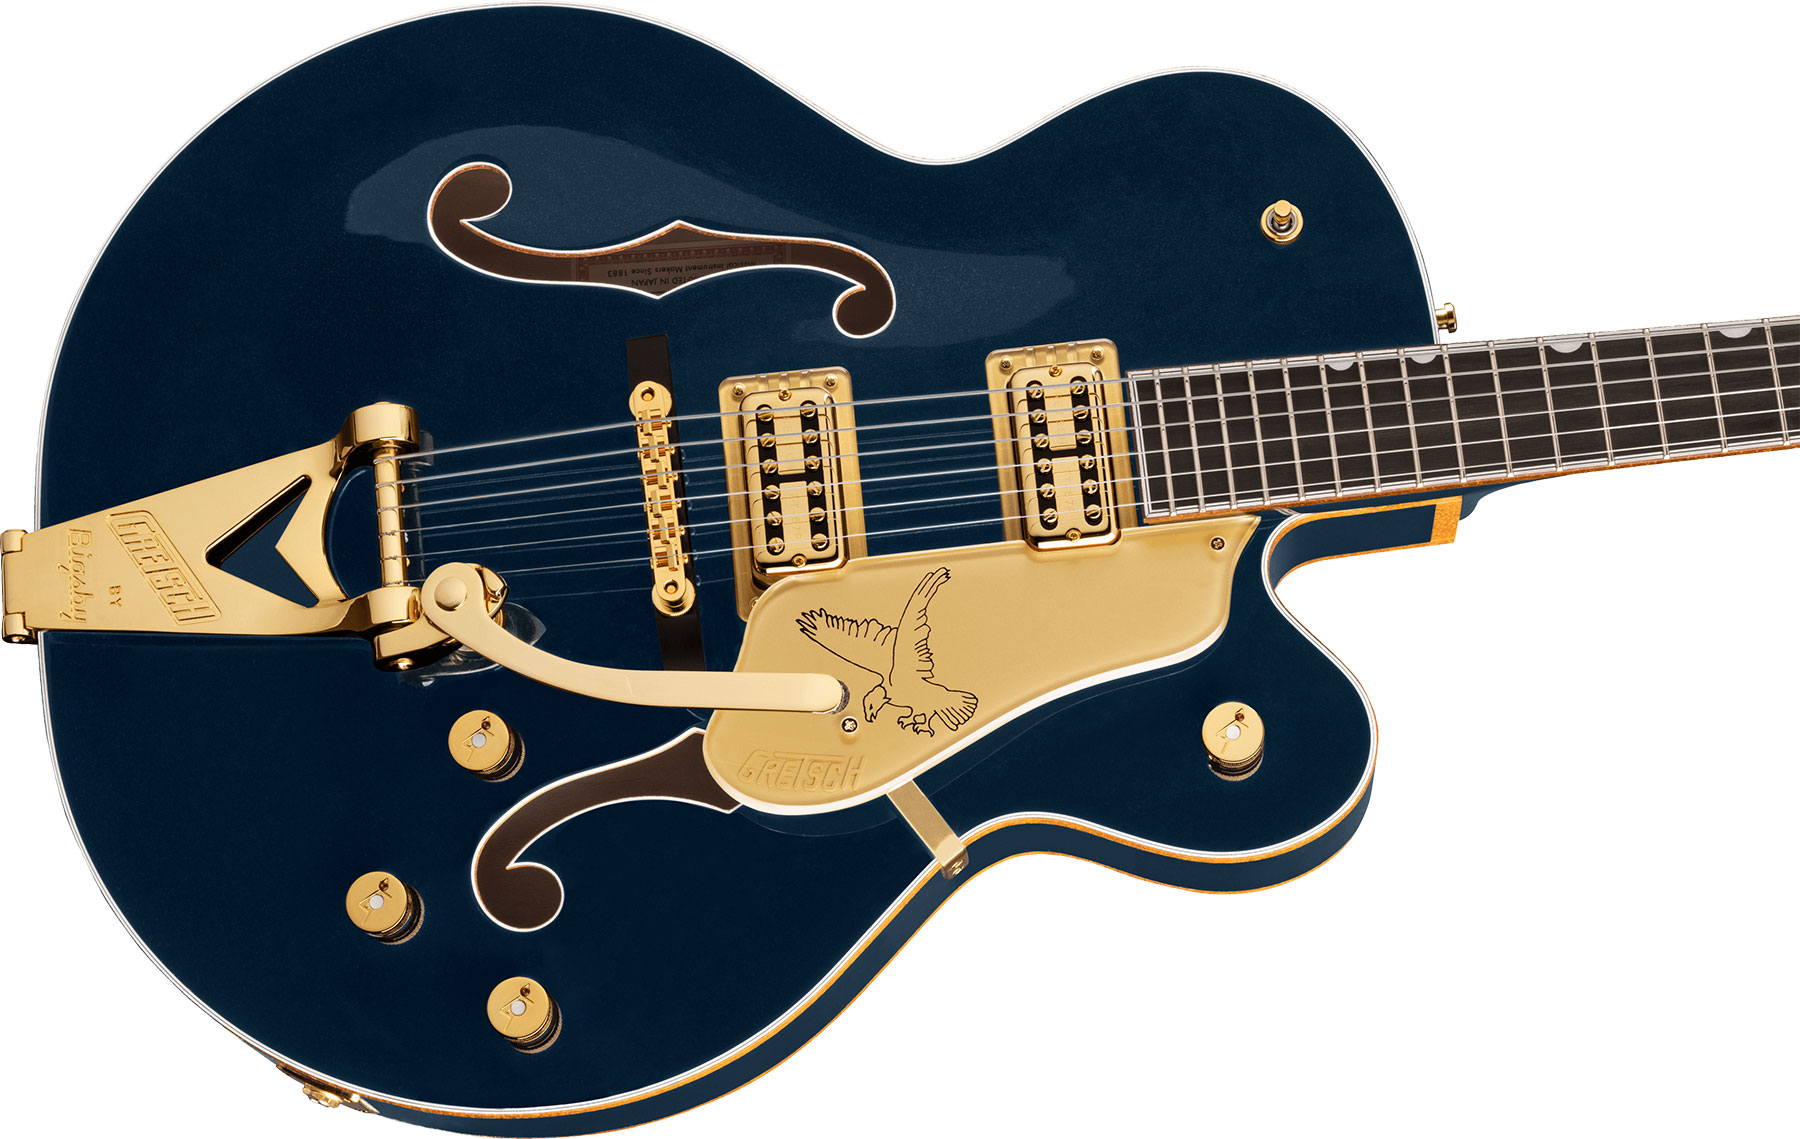 Gretsch G6136tg Players Edition Falcon Hollow Body Pro Jap Hh Trem Eb - Midnight Sapphire - Hollow-body electric guitar - Variation 2